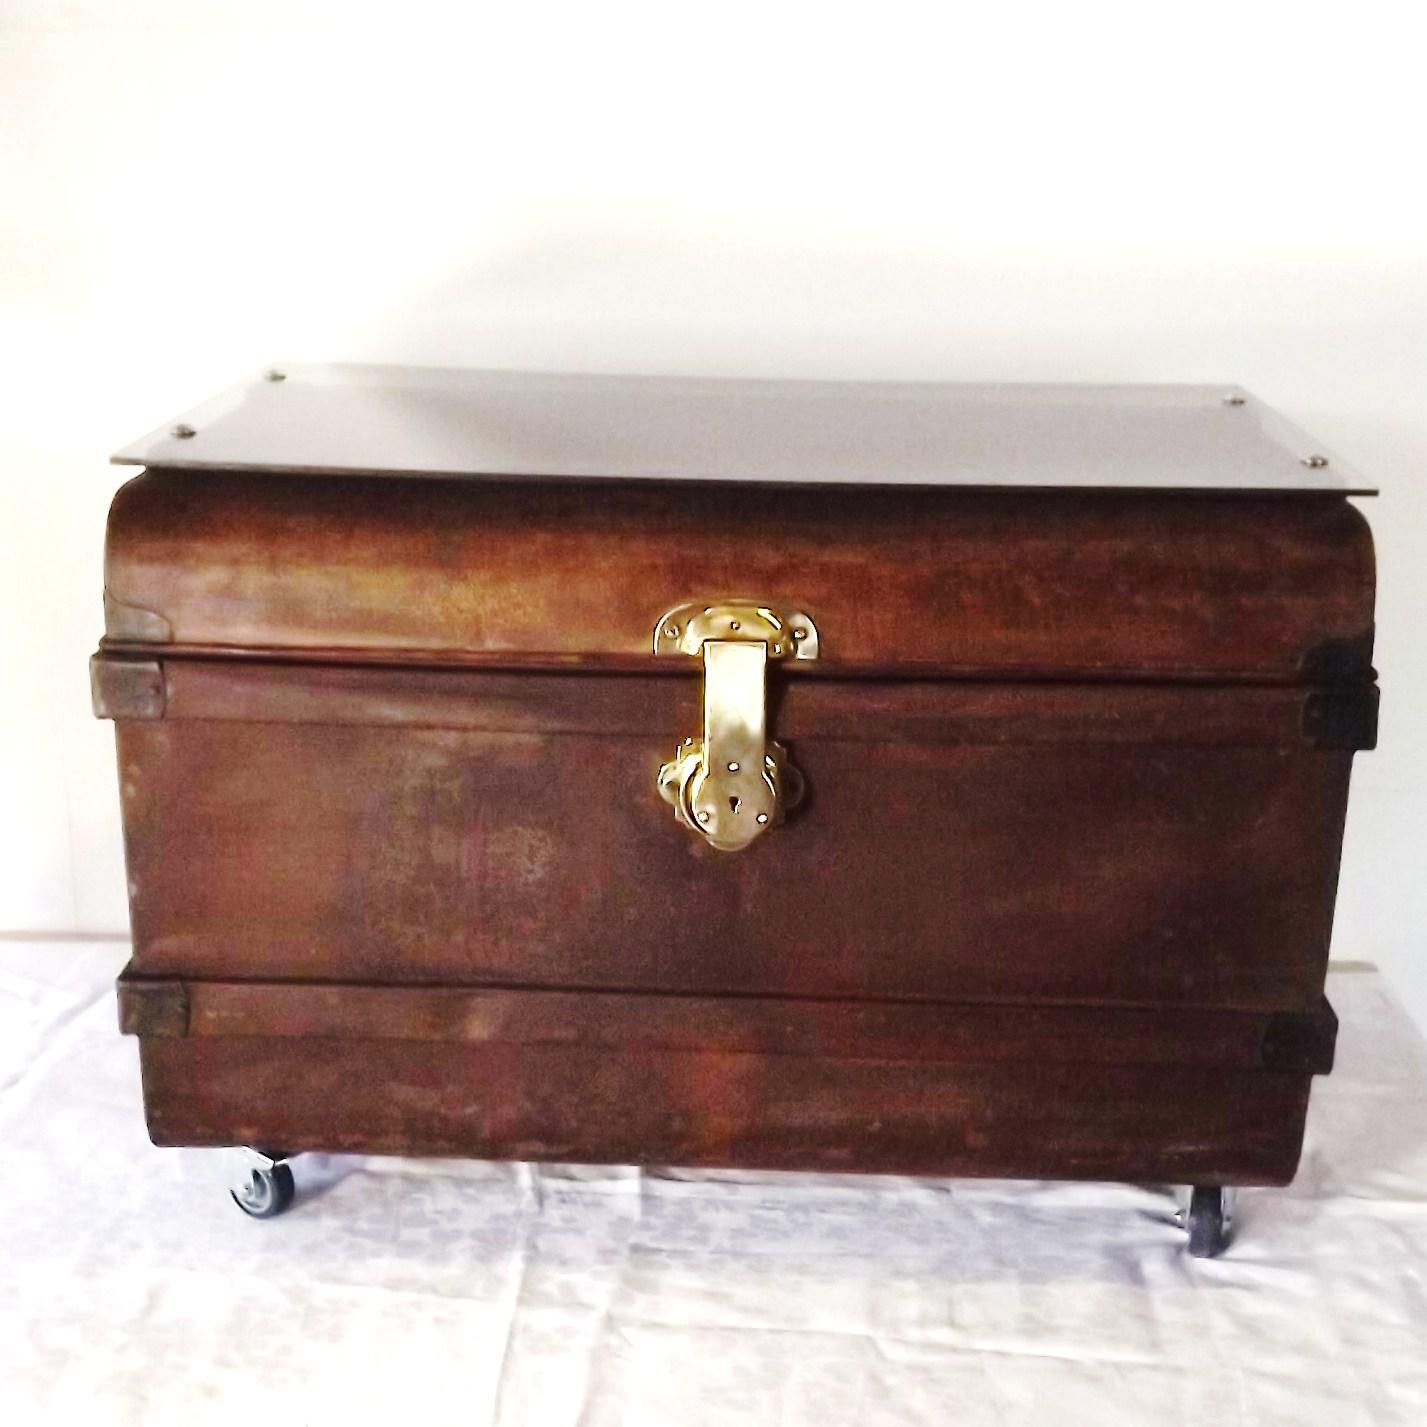 Vintage Upcycled Toleware Steamer Metal Trunk Coffee Table Leather throughout sizing 1427 X 1427